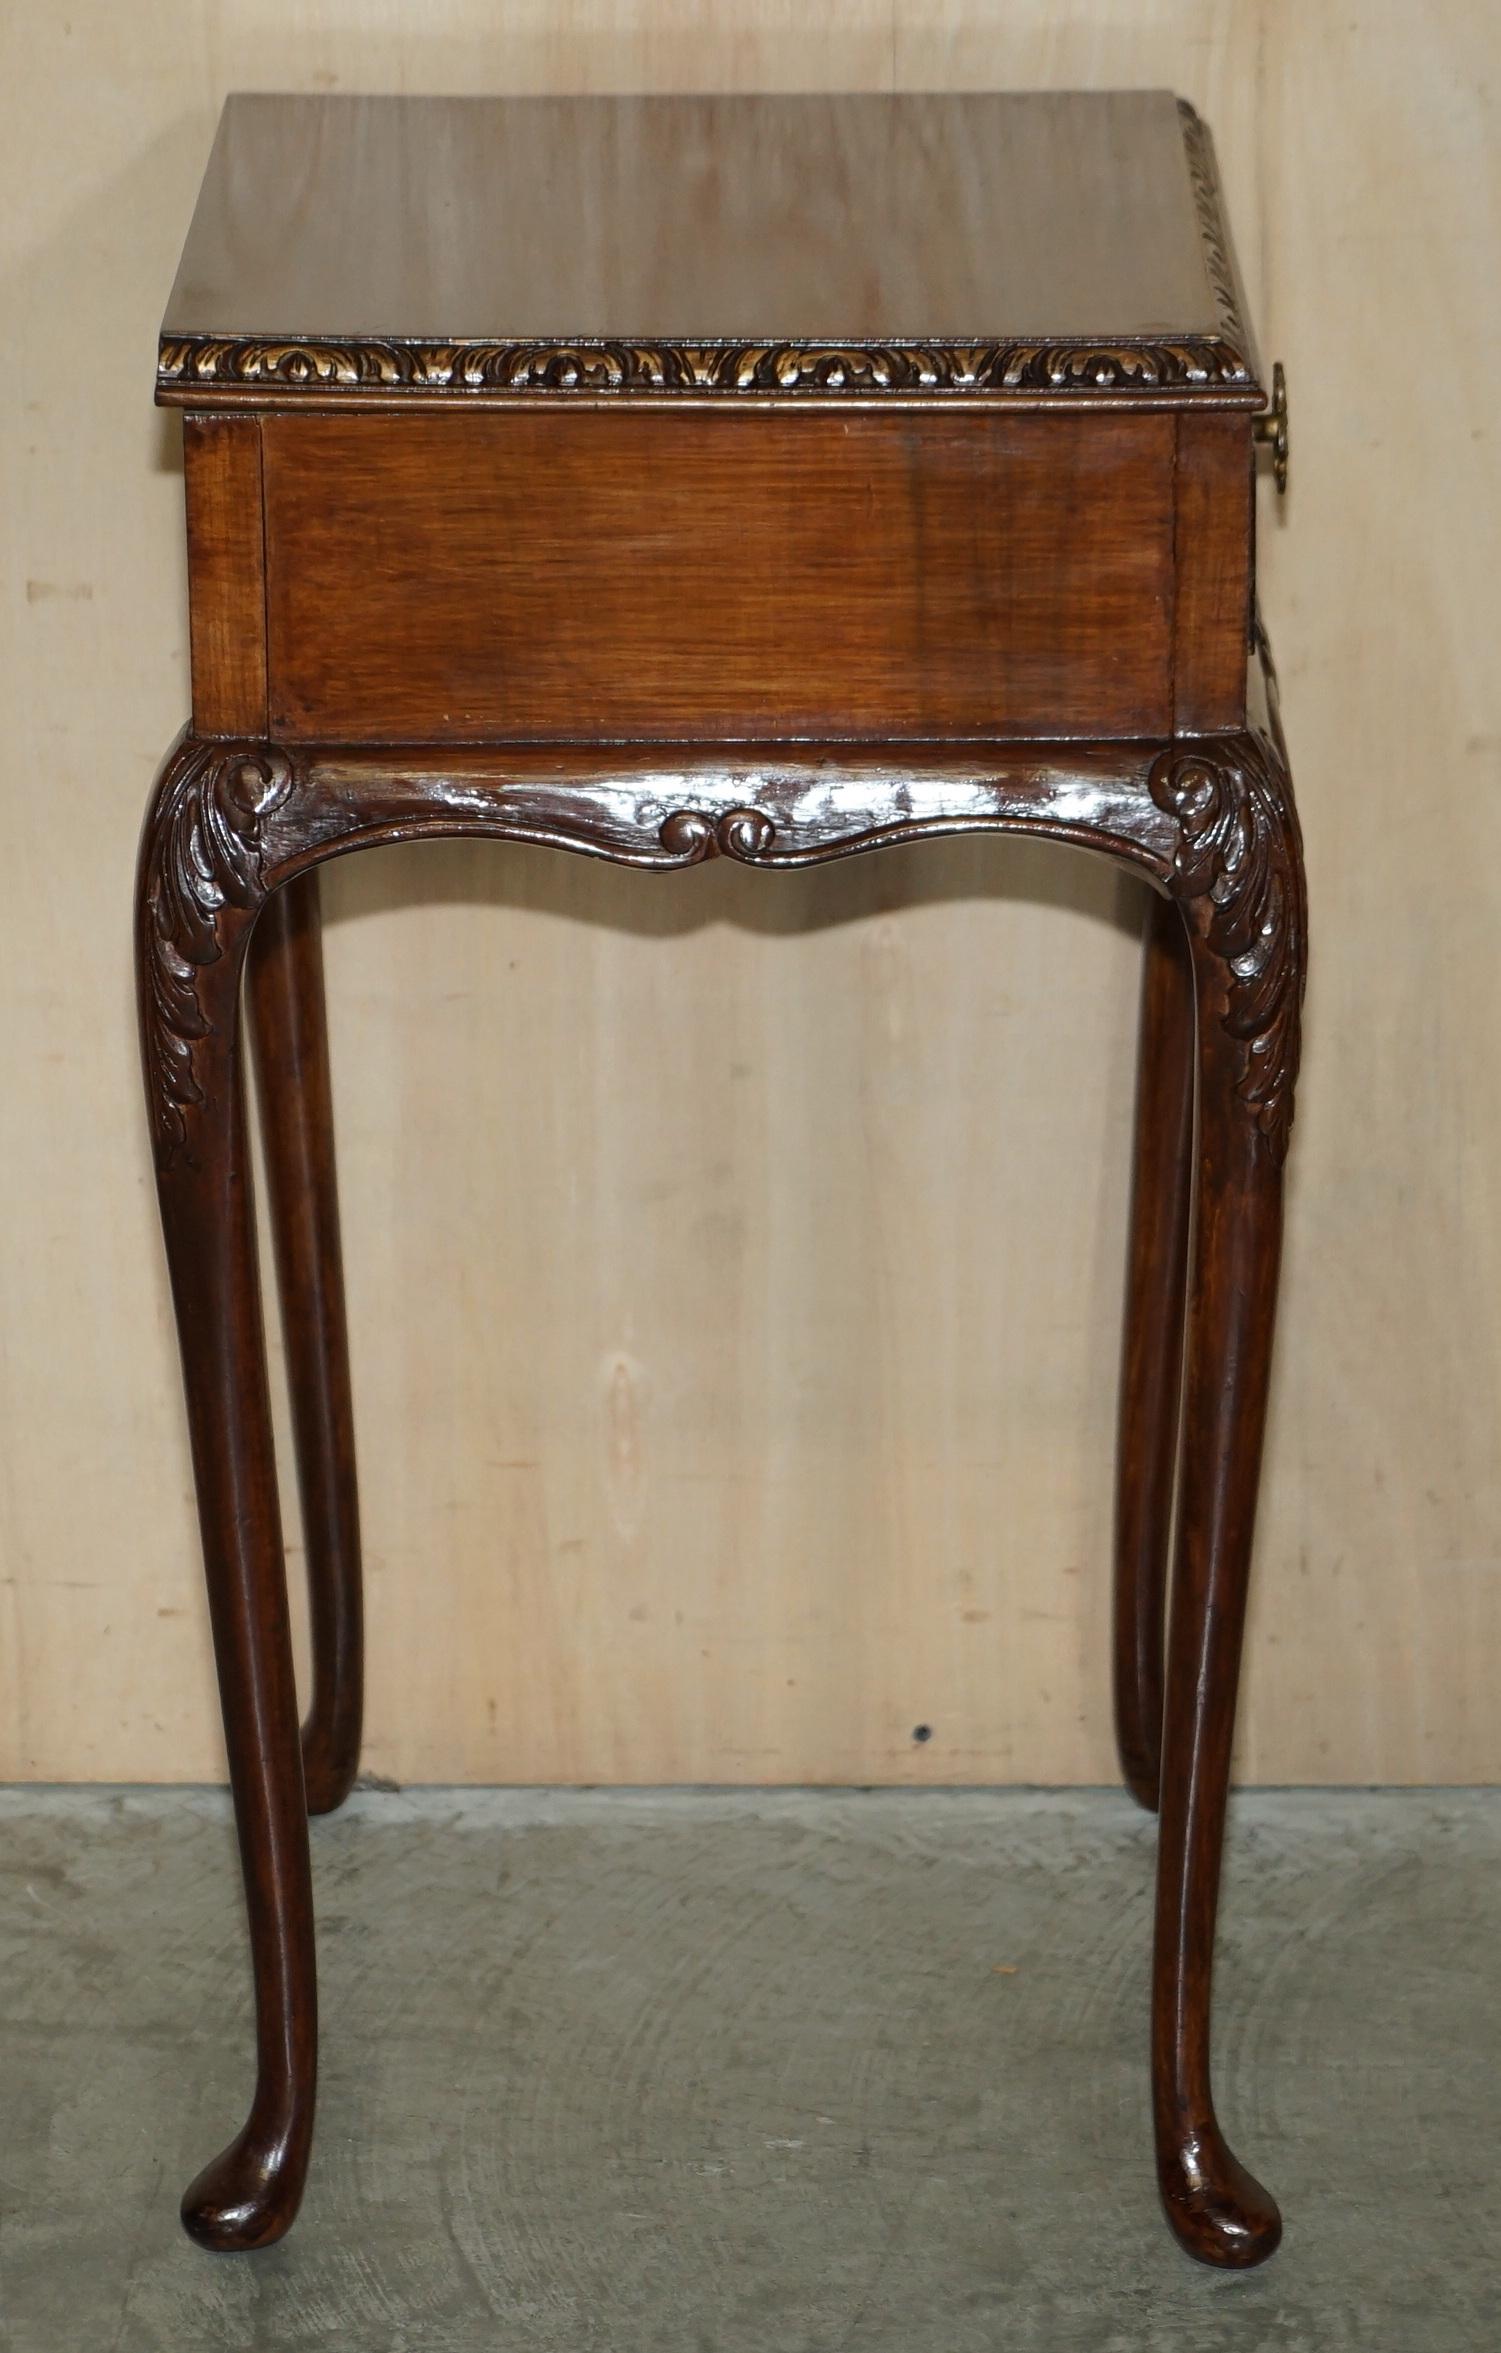 PAIR OF ANTIQUE VICTORIAN ELEGANT CABRIOLE LEGGED SINGLE DRAWER TALL SiDE TABLES For Sale 13